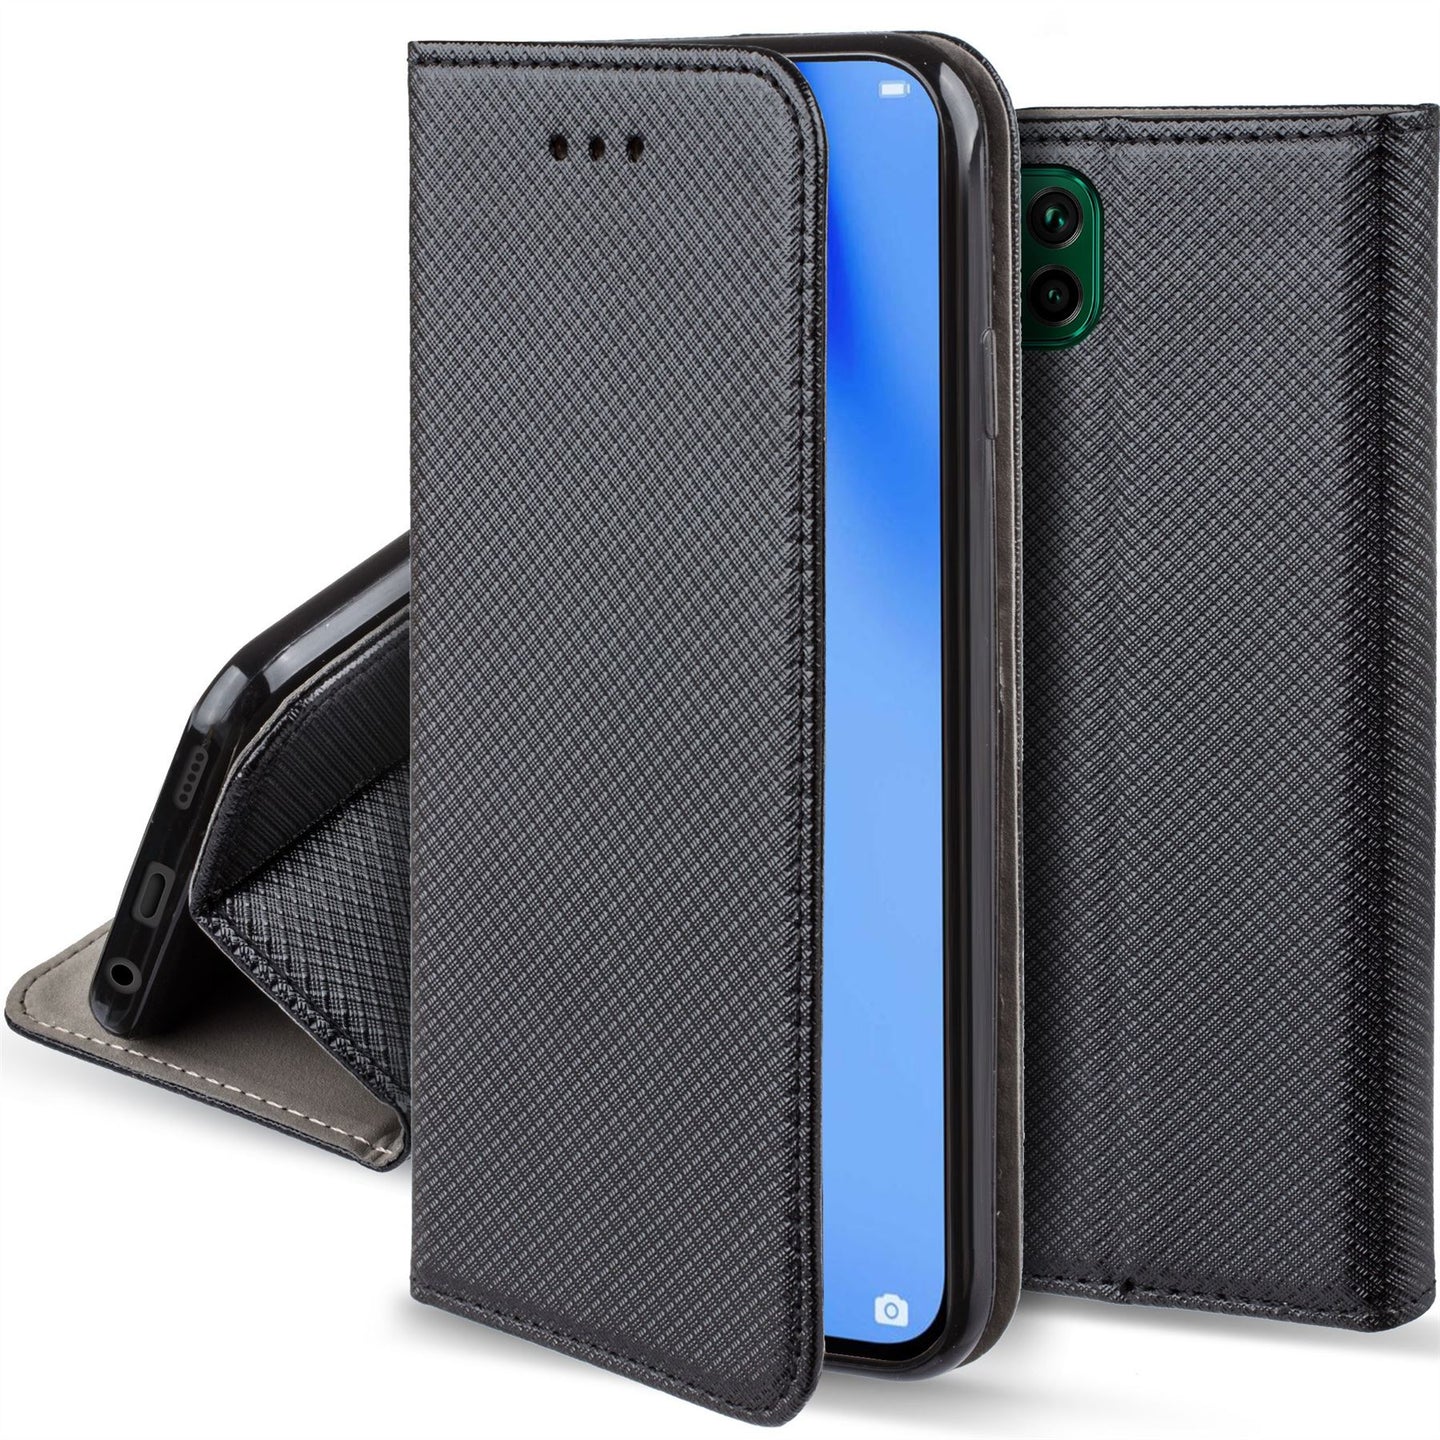 Moozy Case Flip Cover for Huawei P40 Lite, Black - Smart Magnetic Flip Case with Card Holder and Stand